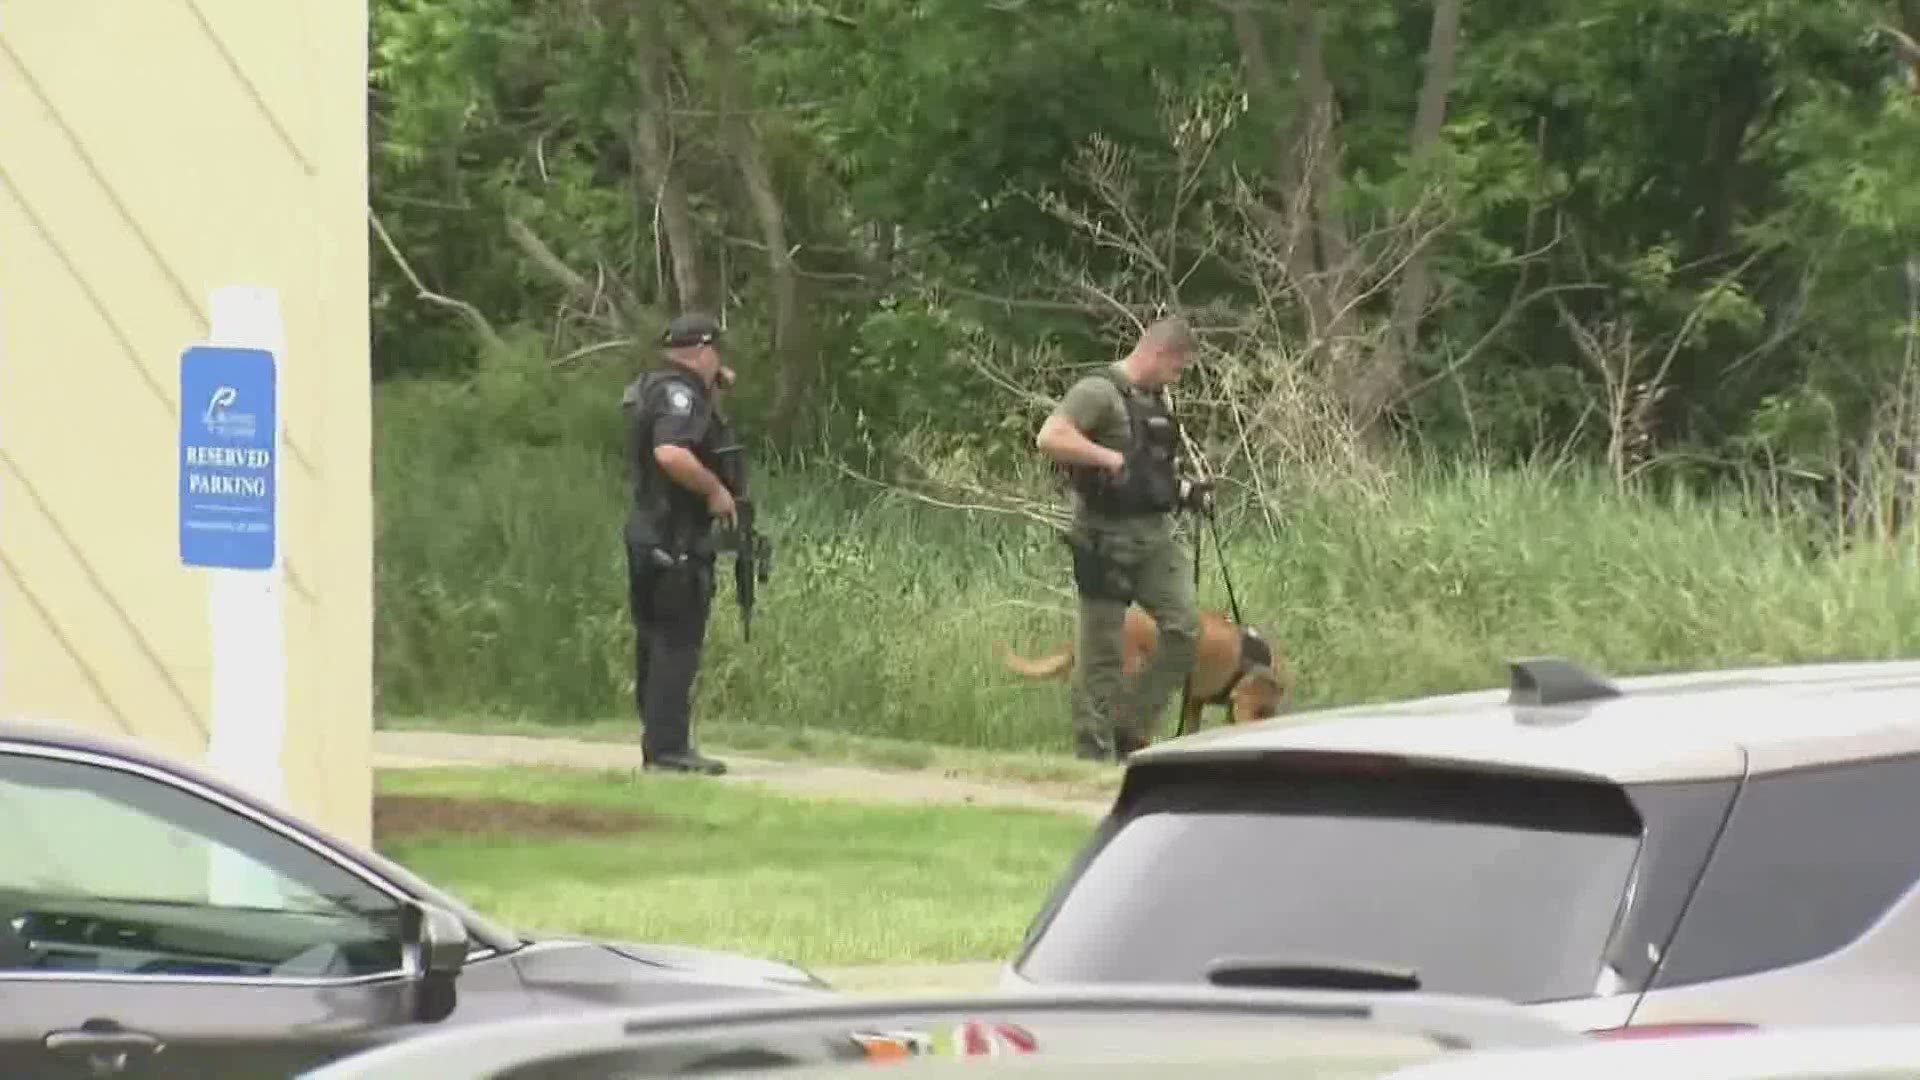 The officers were looking for the suspect in connection with a crime in Braintree in a wooded area behind an apartment complex.